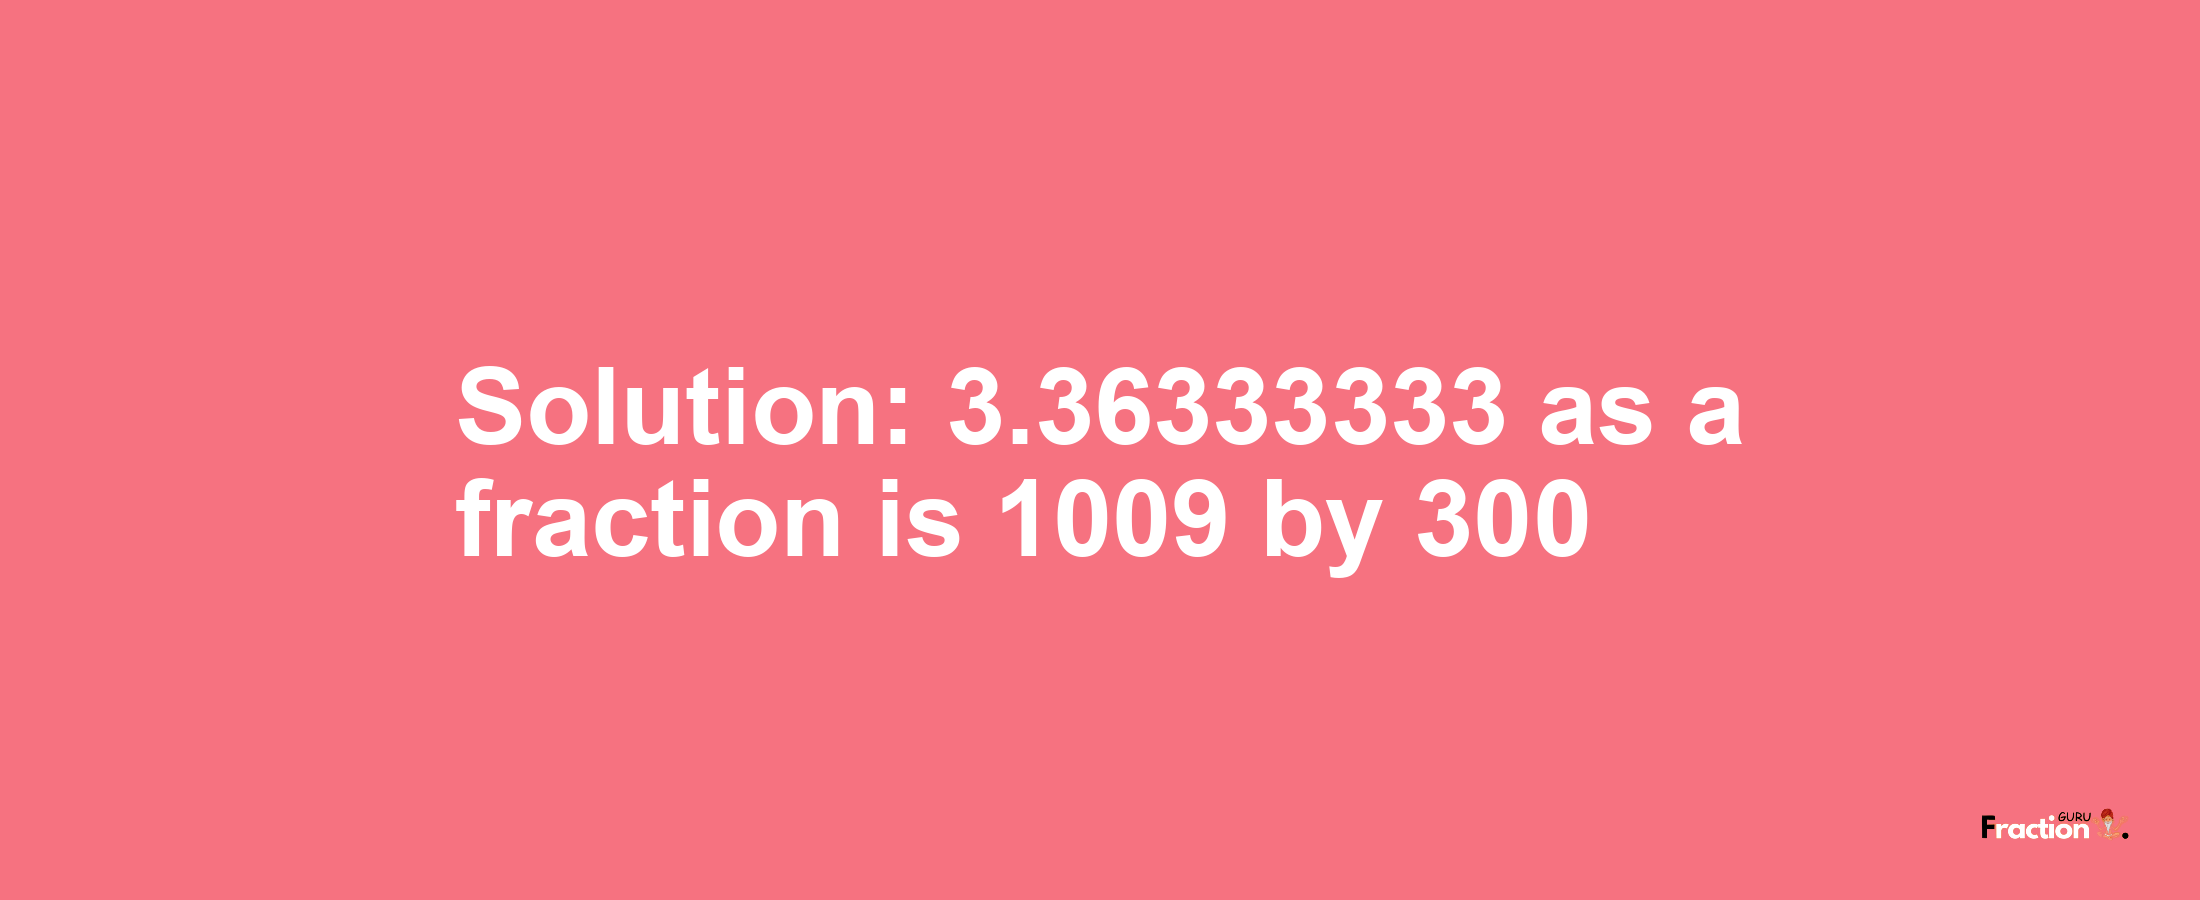 Solution:3.36333333 as a fraction is 1009/300